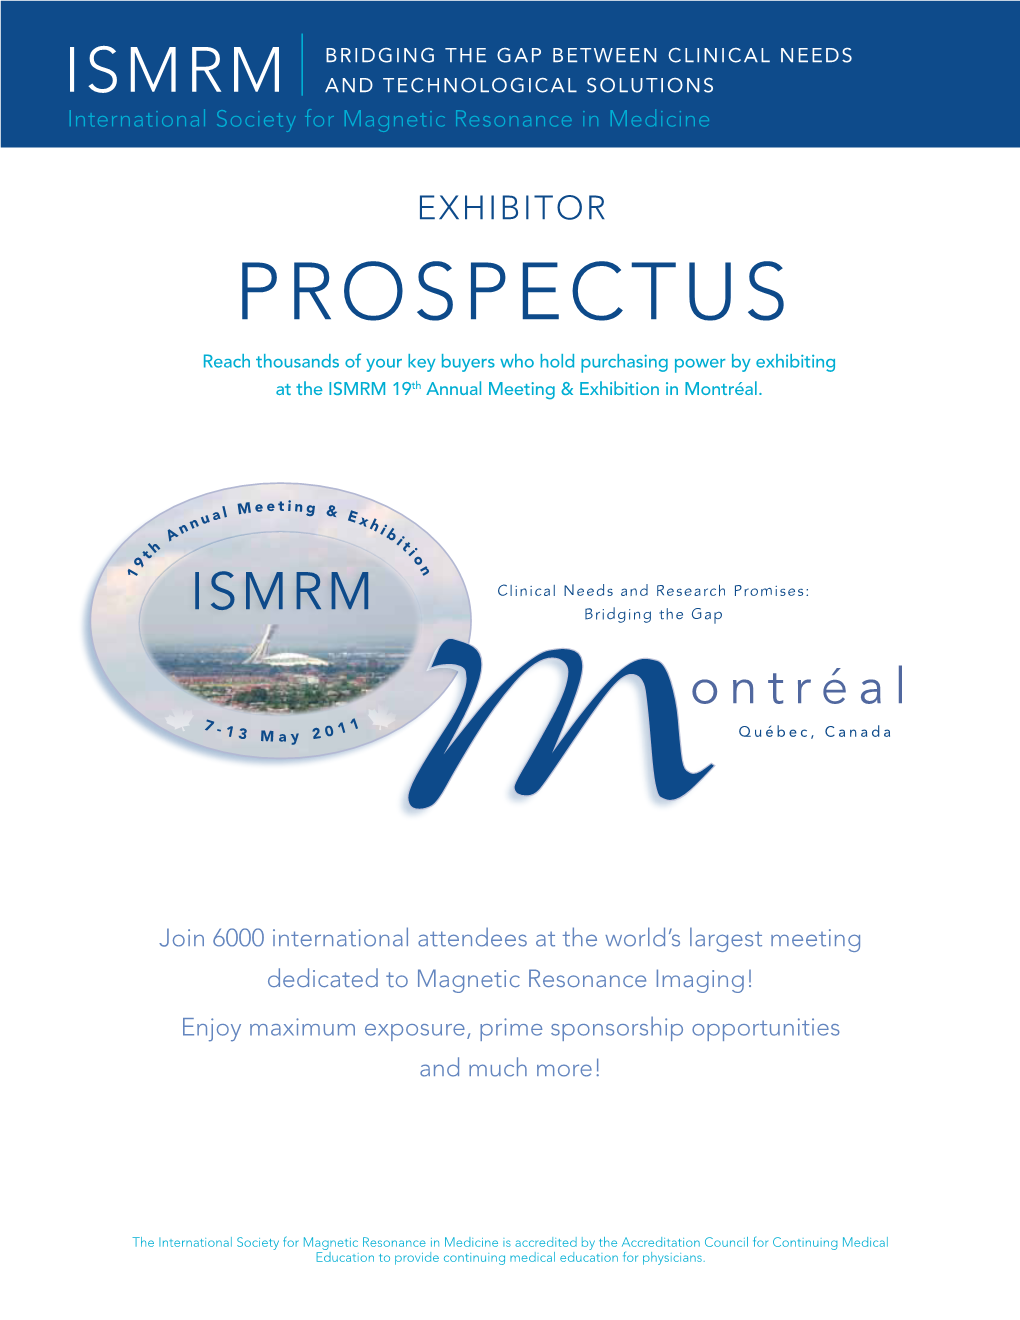 PROSPECTUS Reach Thousands of Your Key Buyers Who Hold Purchasing Power by Exhibiting at the ISMRM 19Th Annual Meeting & Exhibition in Montréal